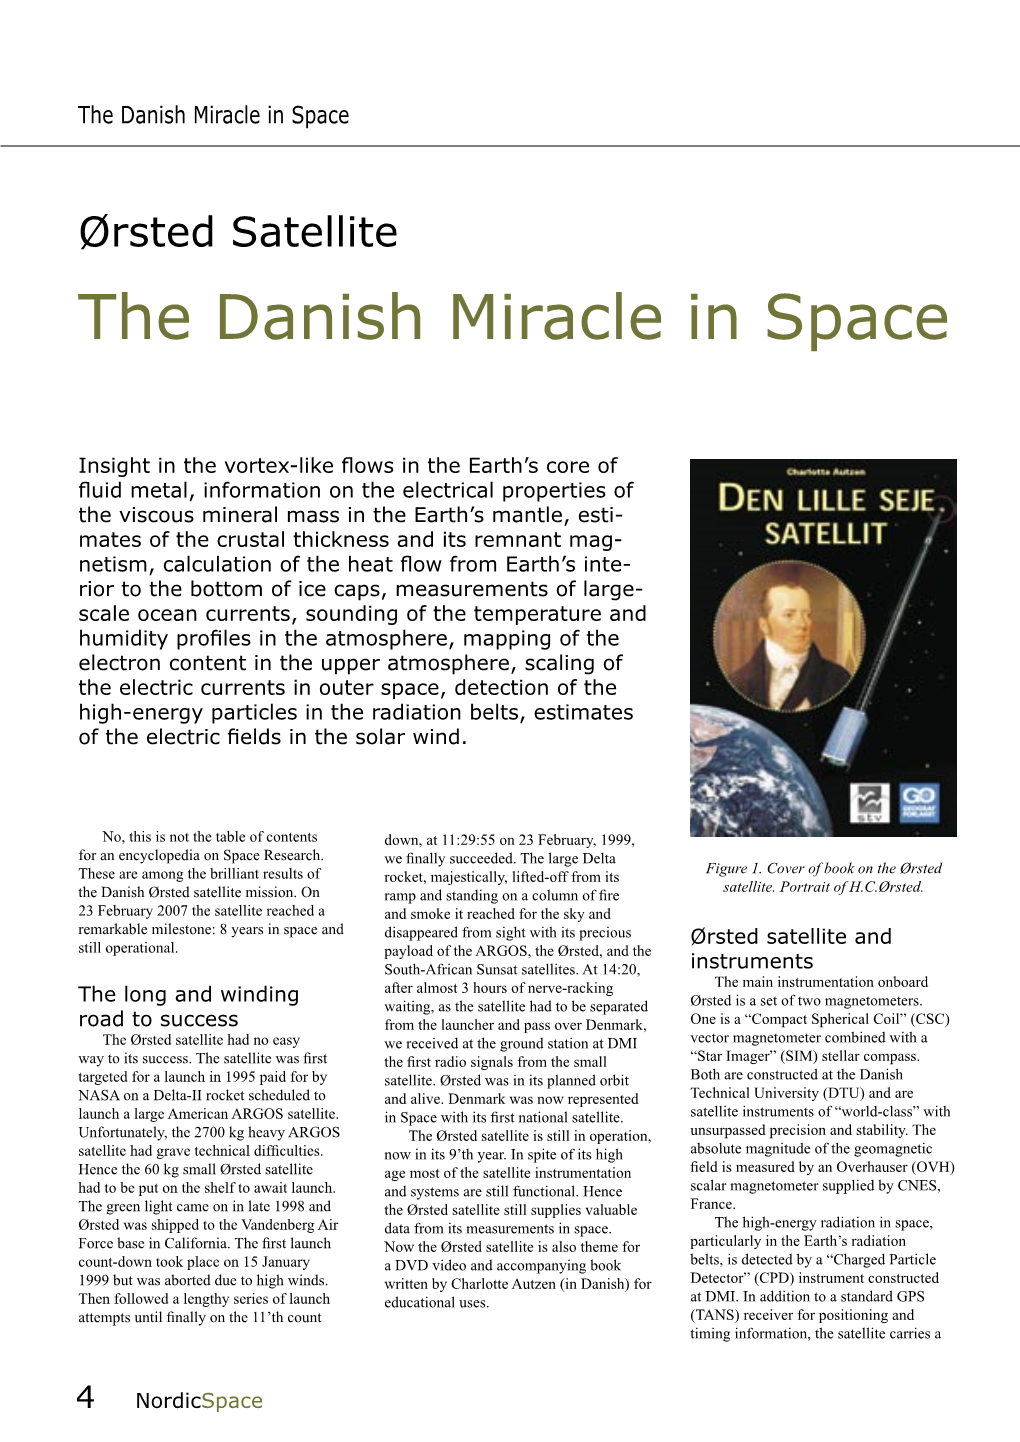 The Danish Miracle in Space